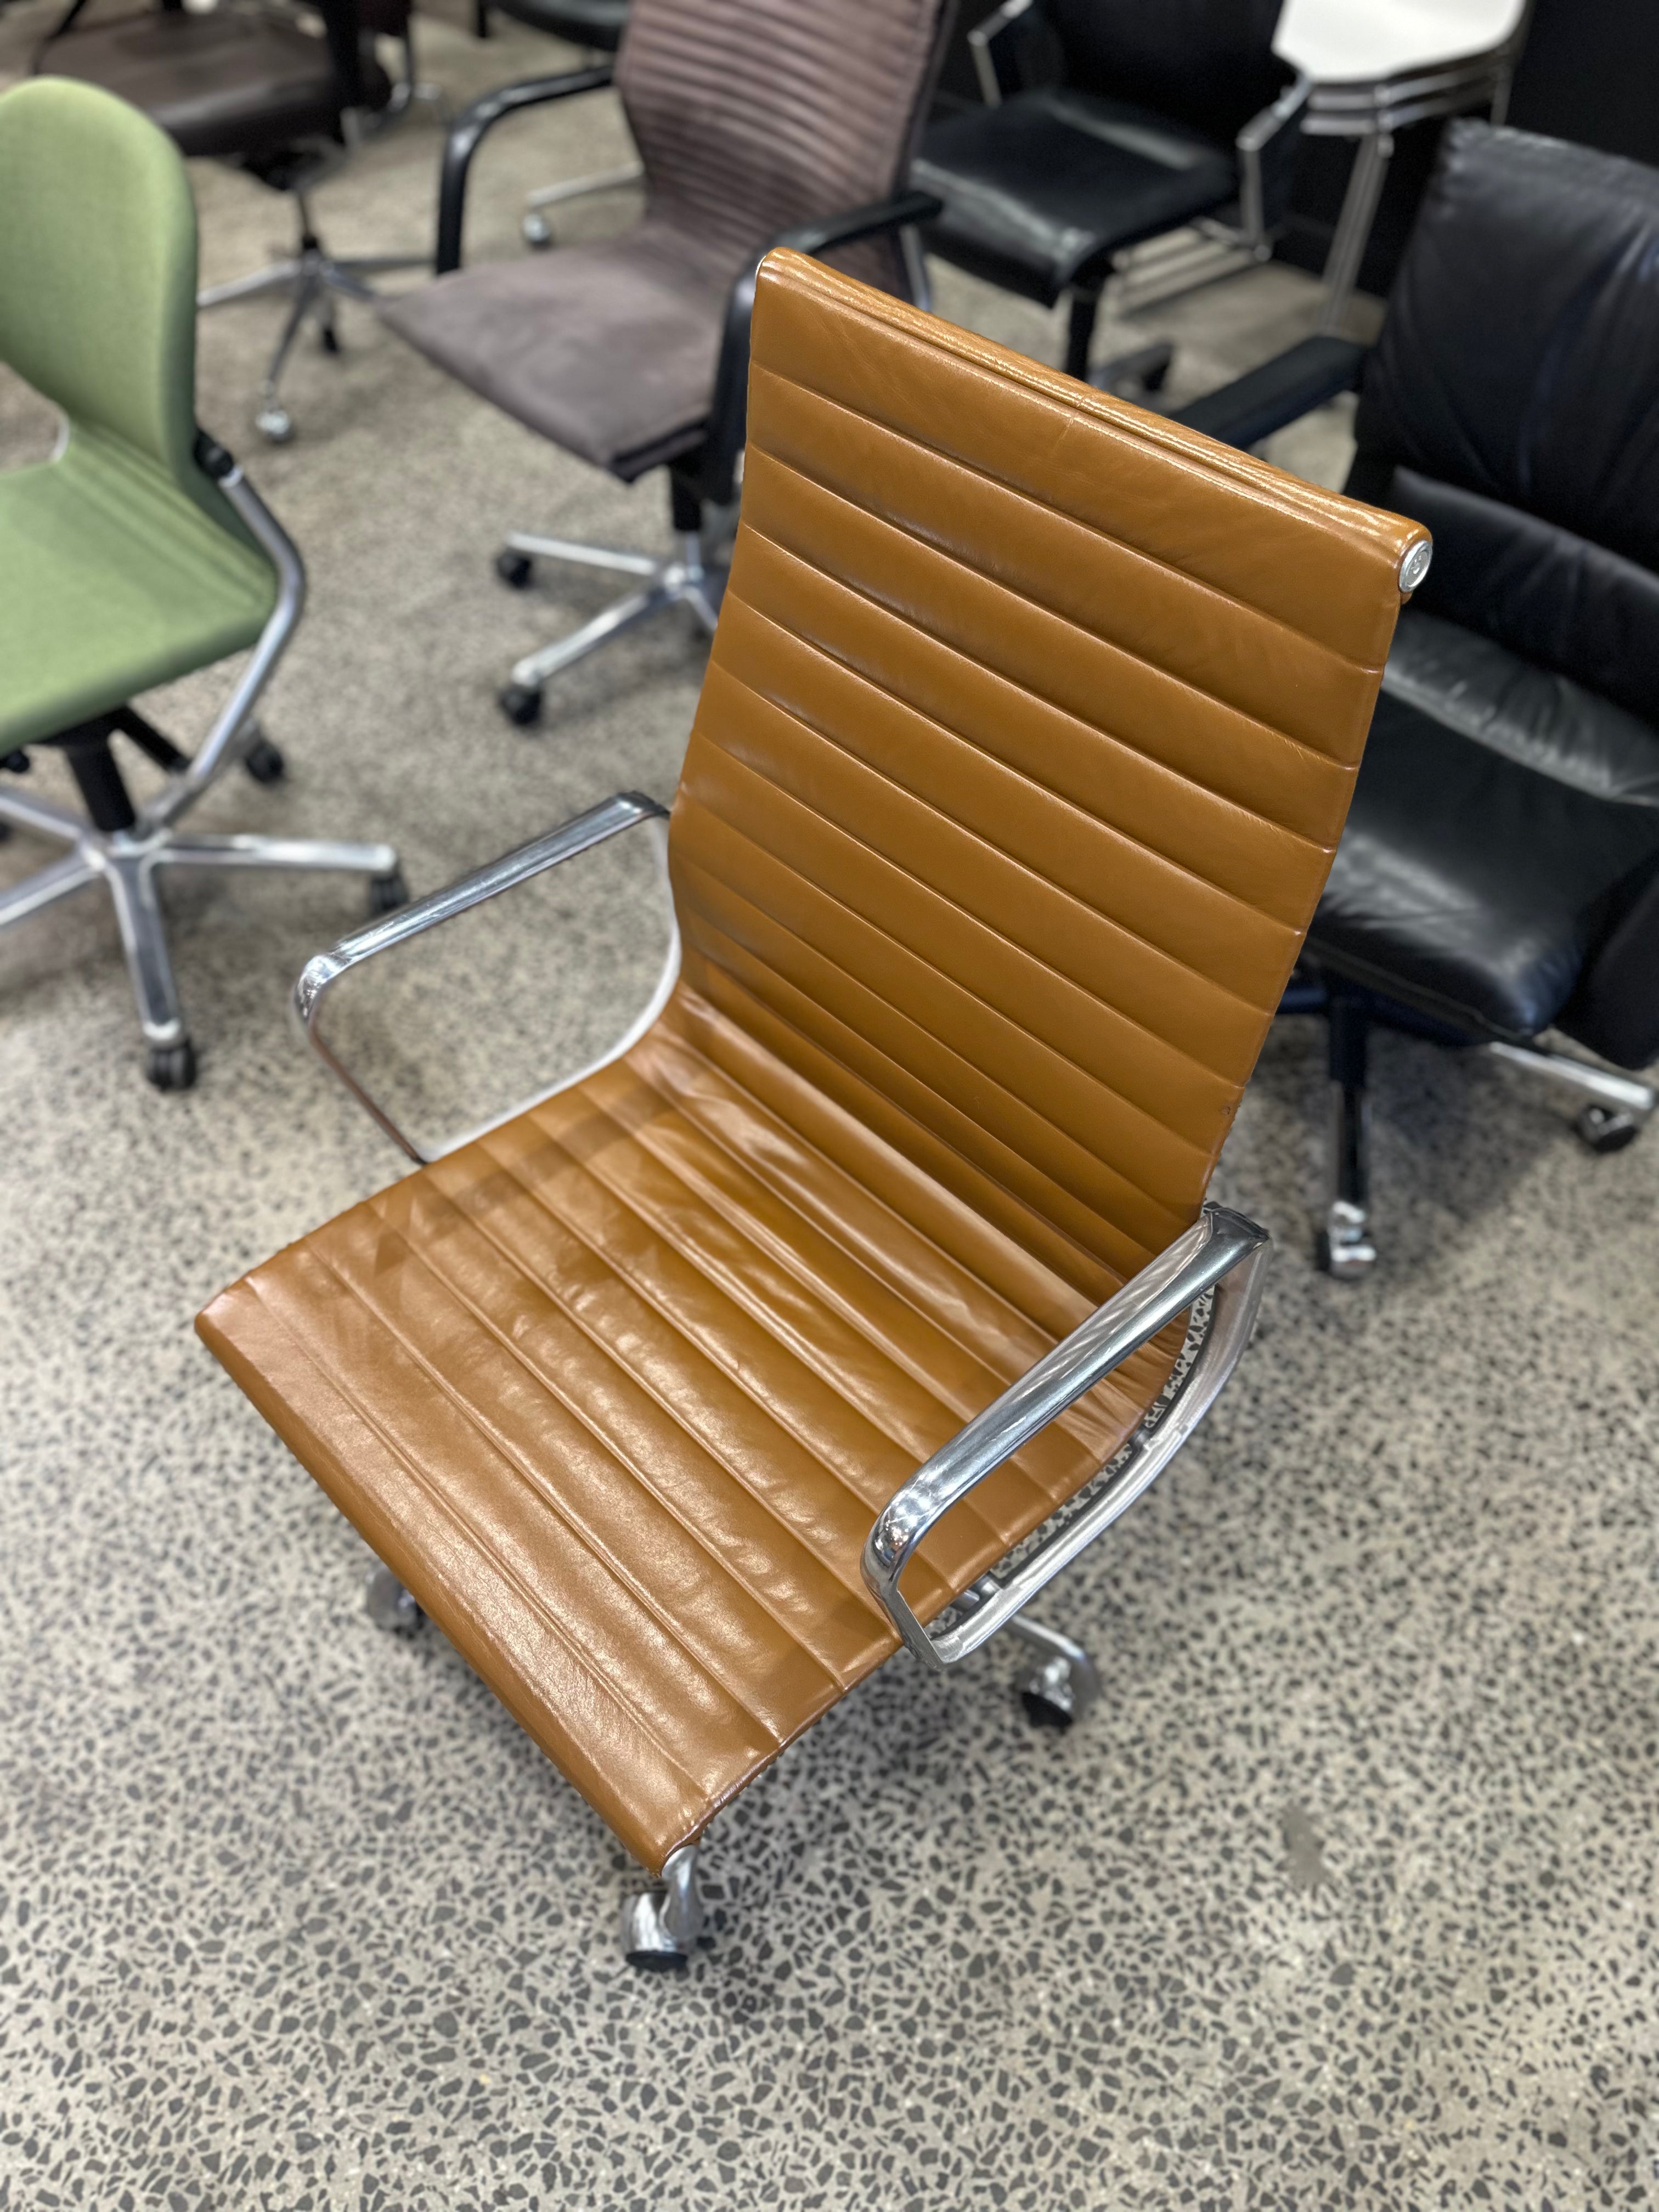 Herman Miller Eames Aluminium Group Management Chair High back Verified Authentic Tan Brown Leather Ray and Charles Eames Chairhub North Melbourne Australia Premium Original Executive Luxury Chairs